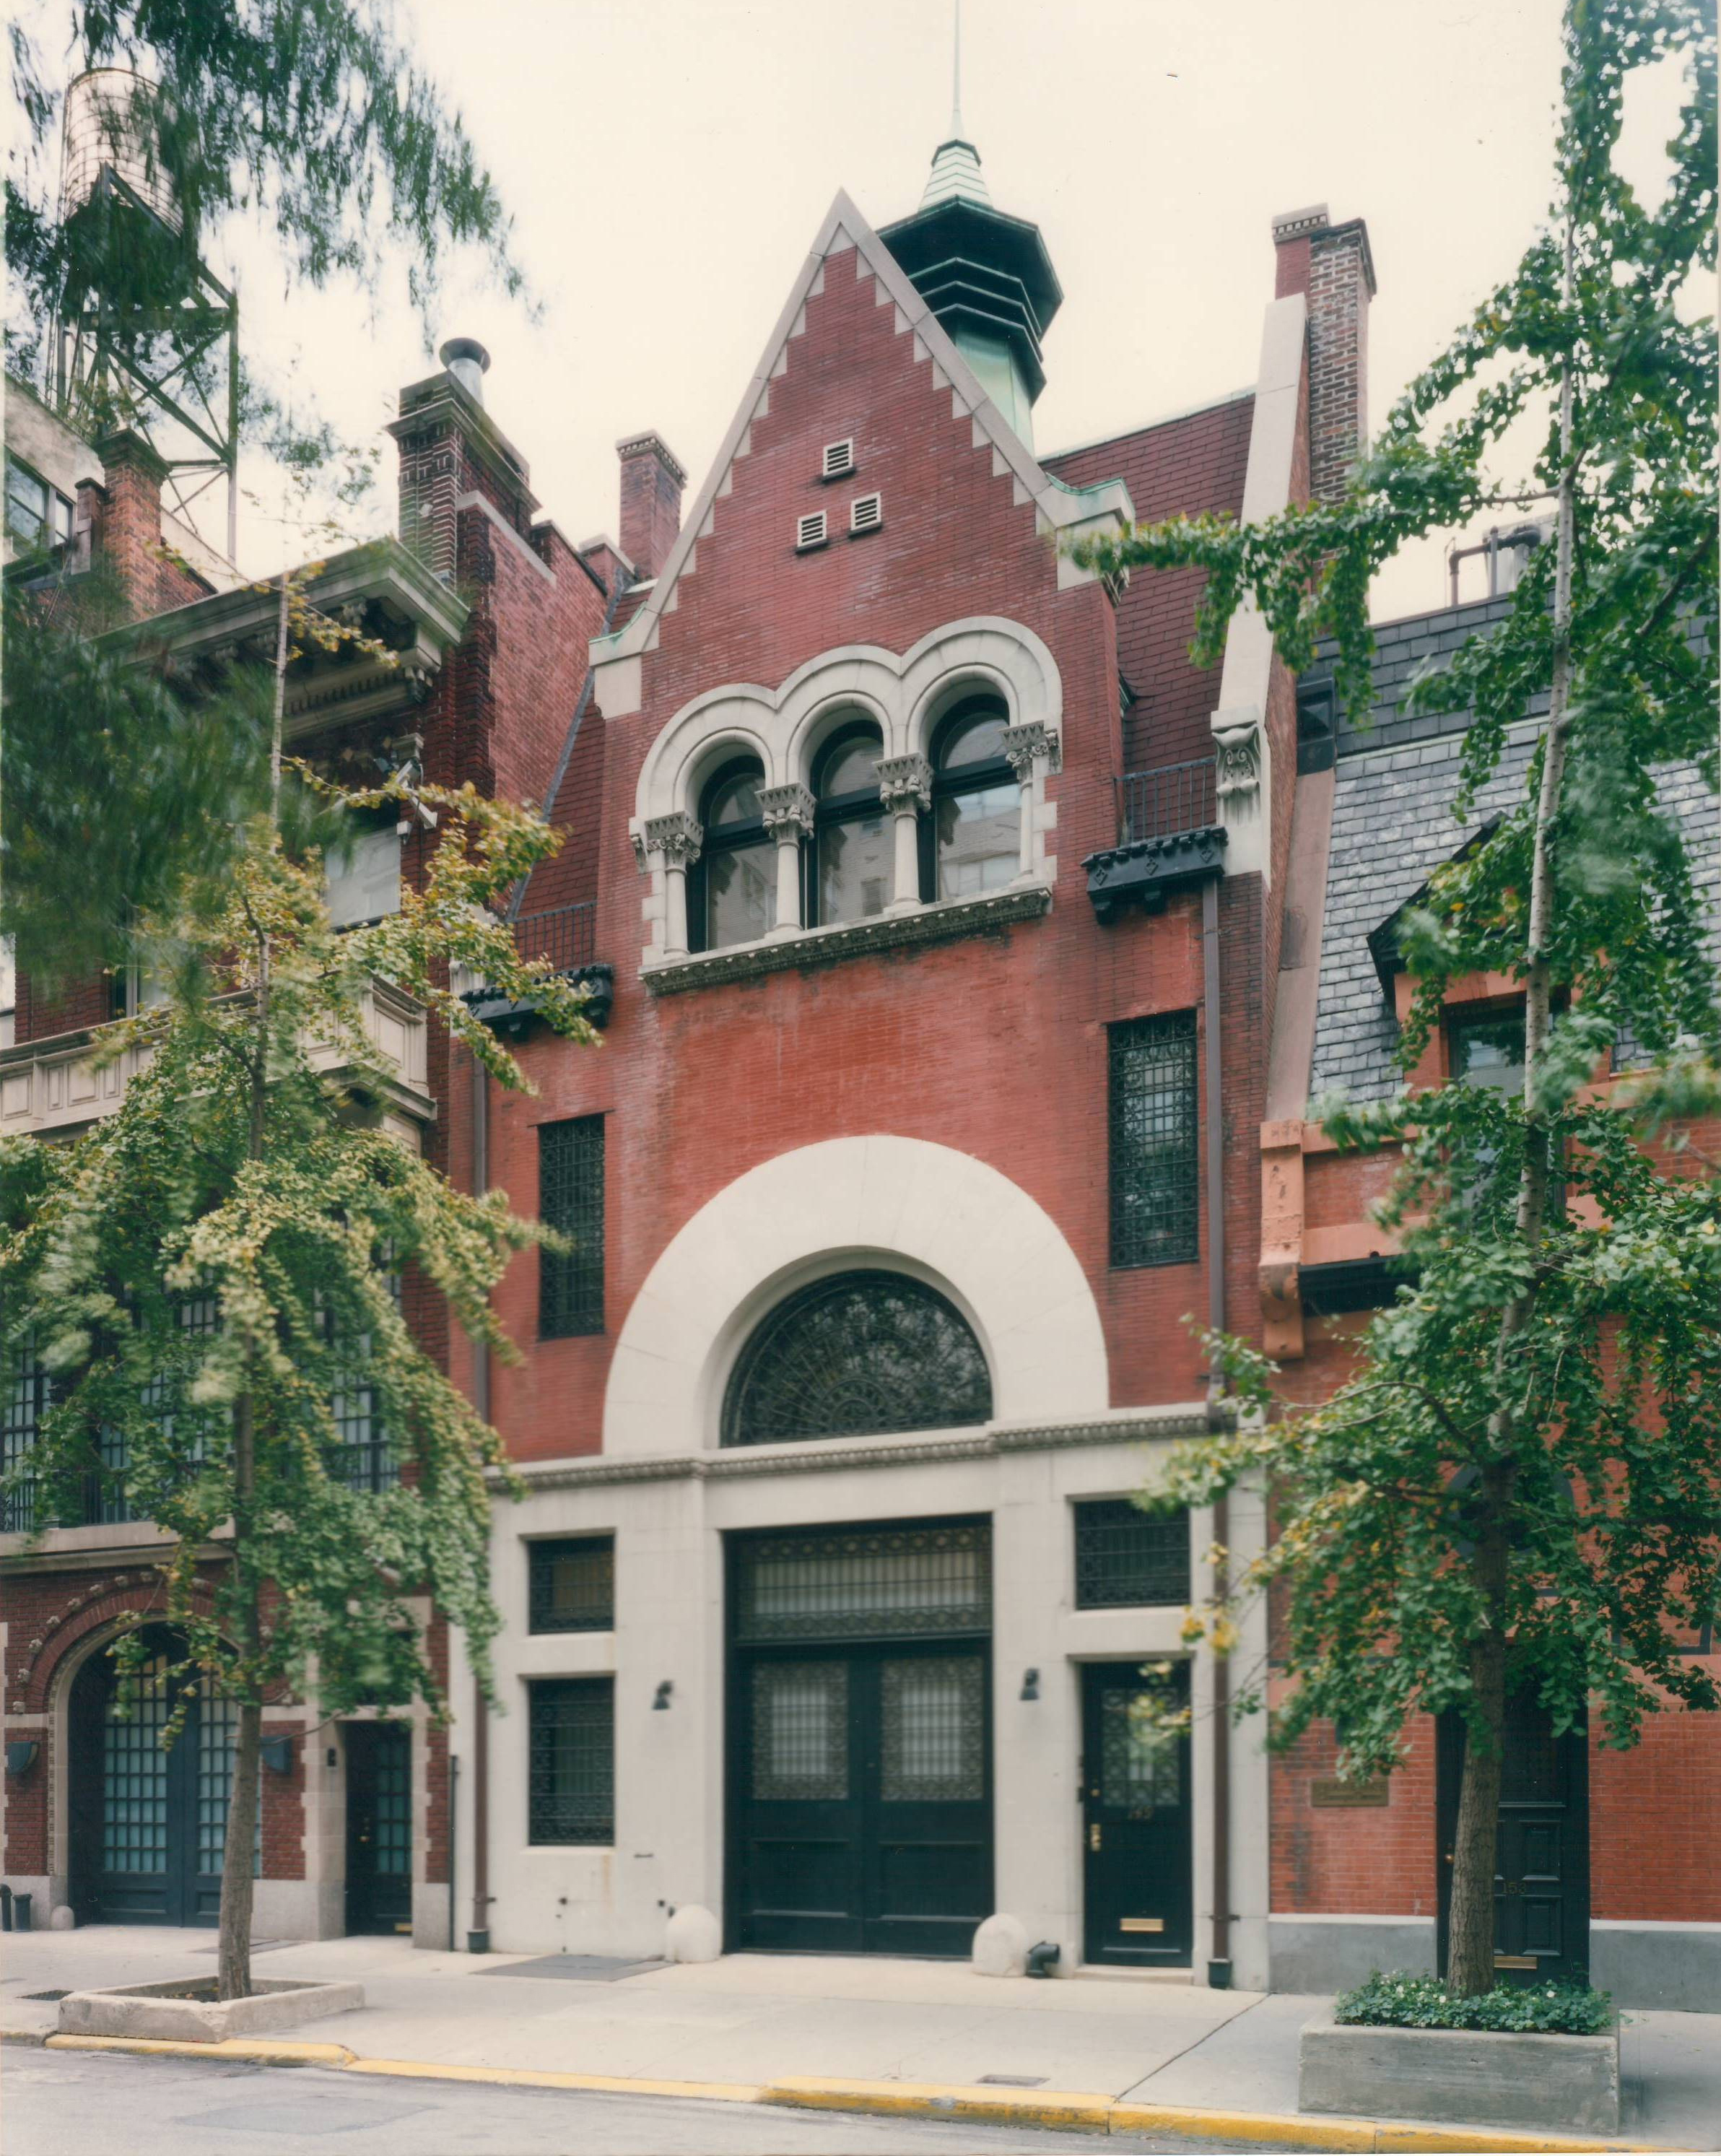  East 69th St. Carriage House, Robert Lipson Architect 